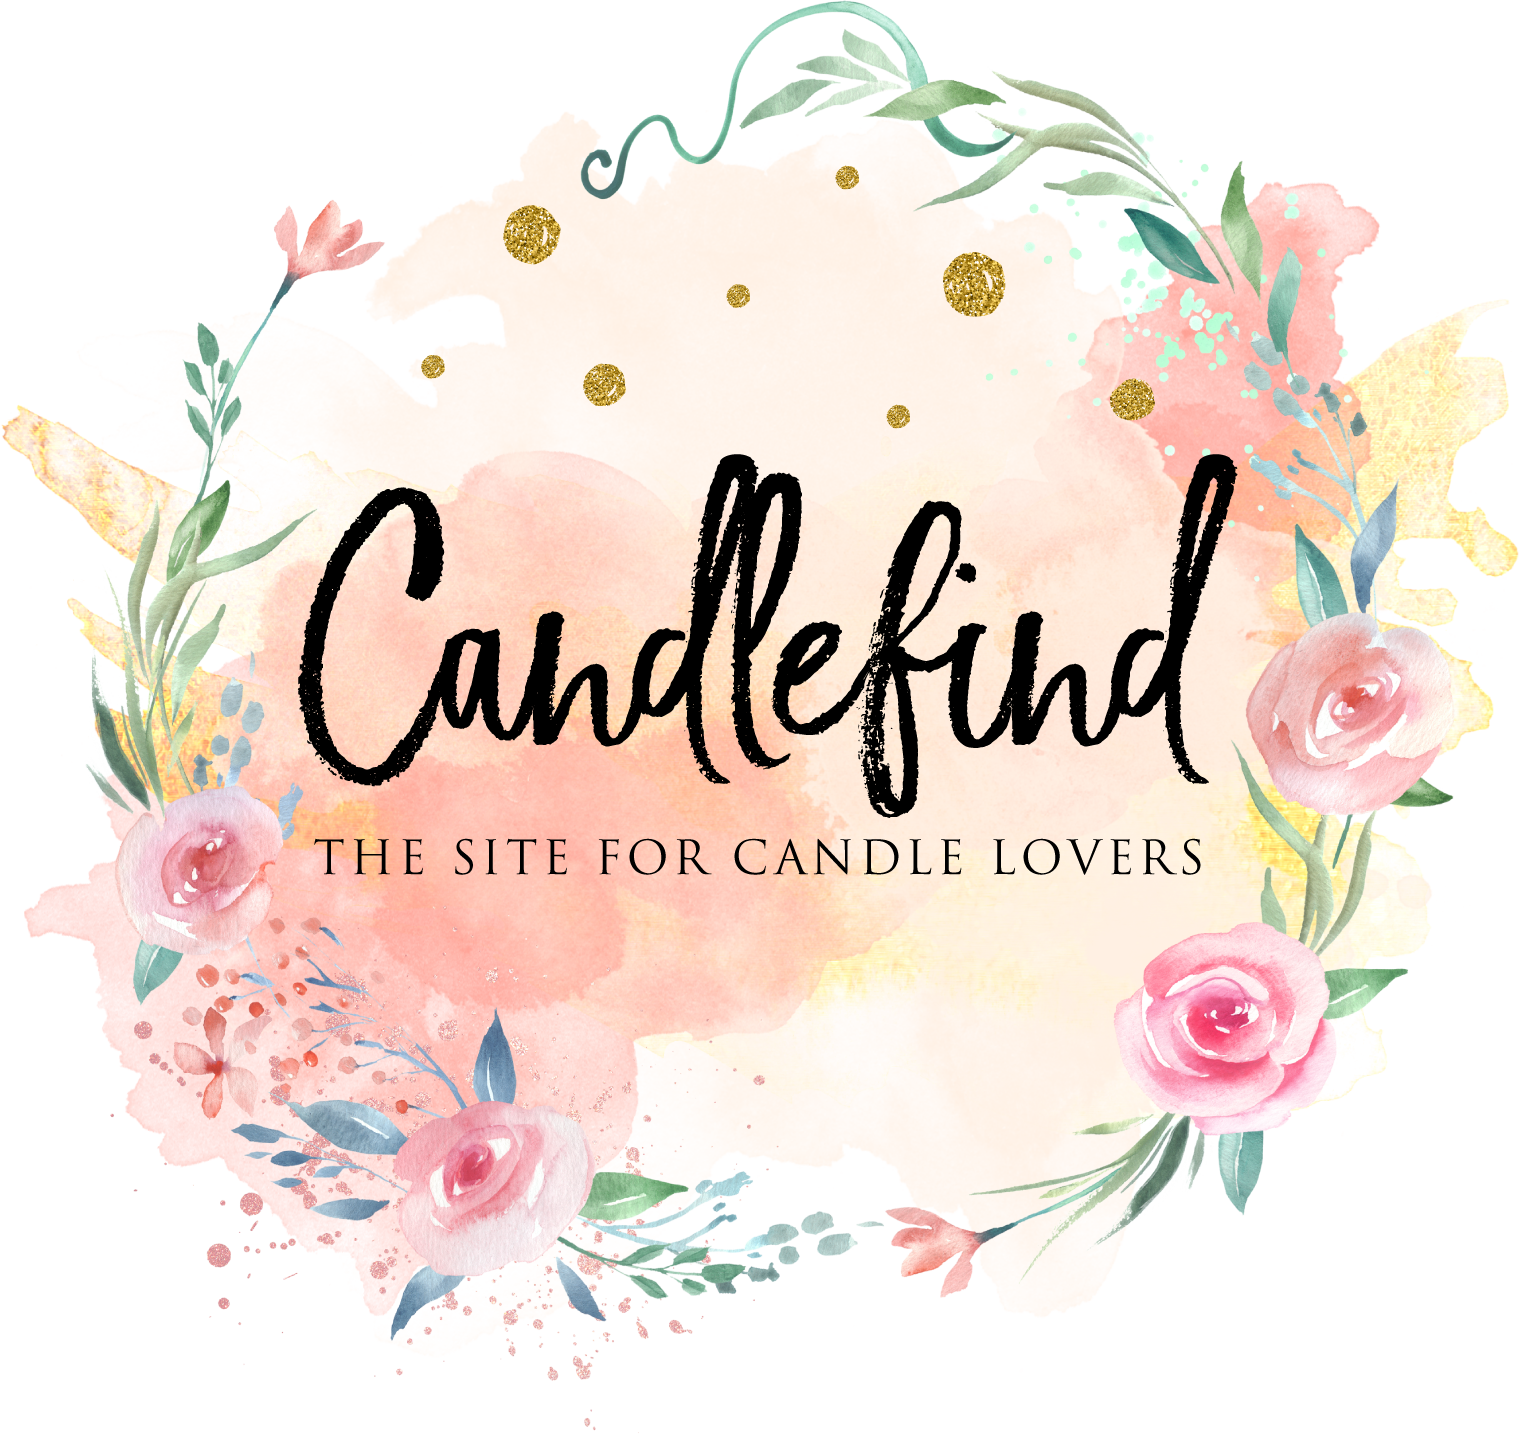 CandleFind The Site for Candle Lovers